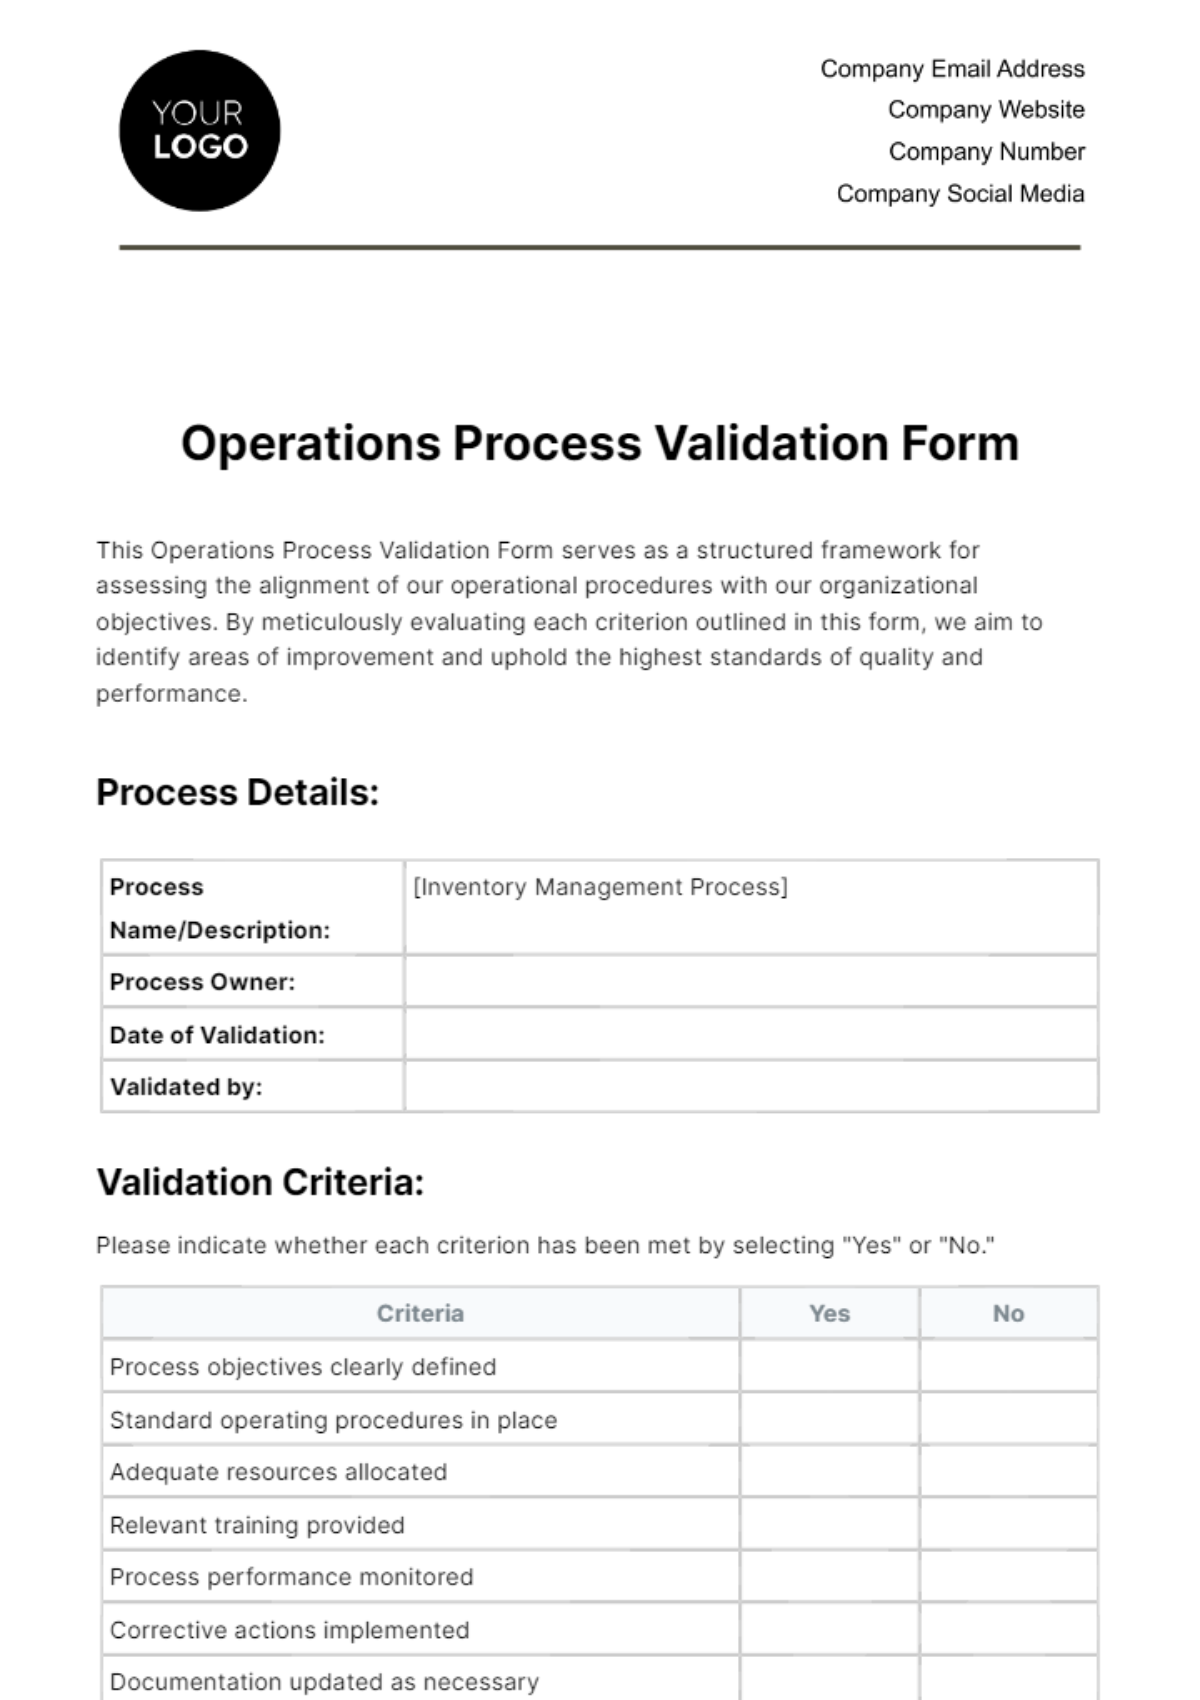 Operations Process Validation Form Template